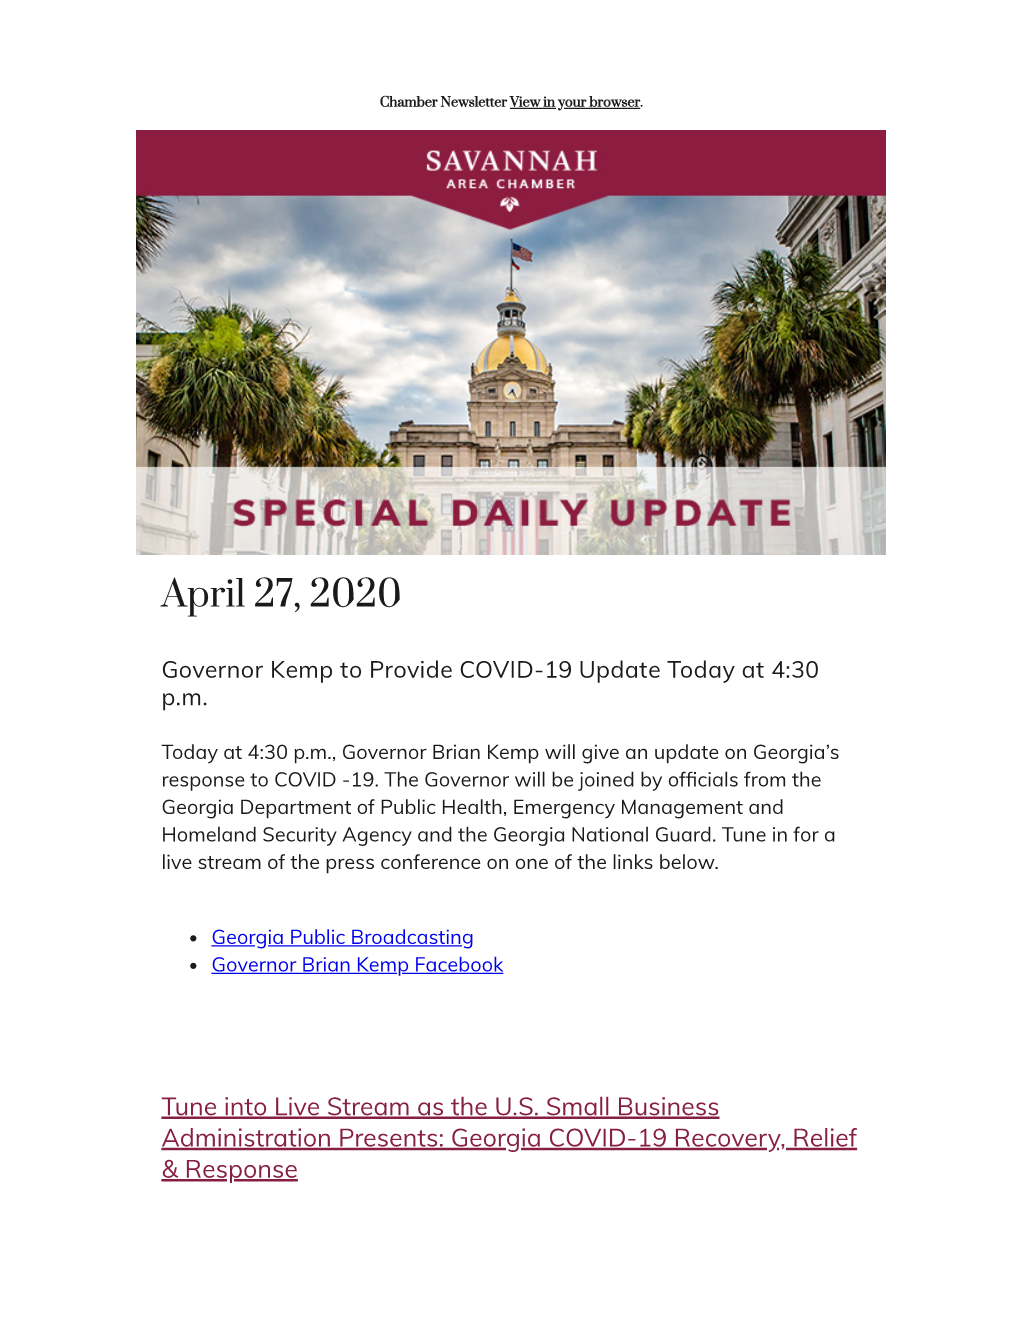 April 27, 2020 Governor Kemp to Provide COVID-19 Update Today at 4:30 P.M